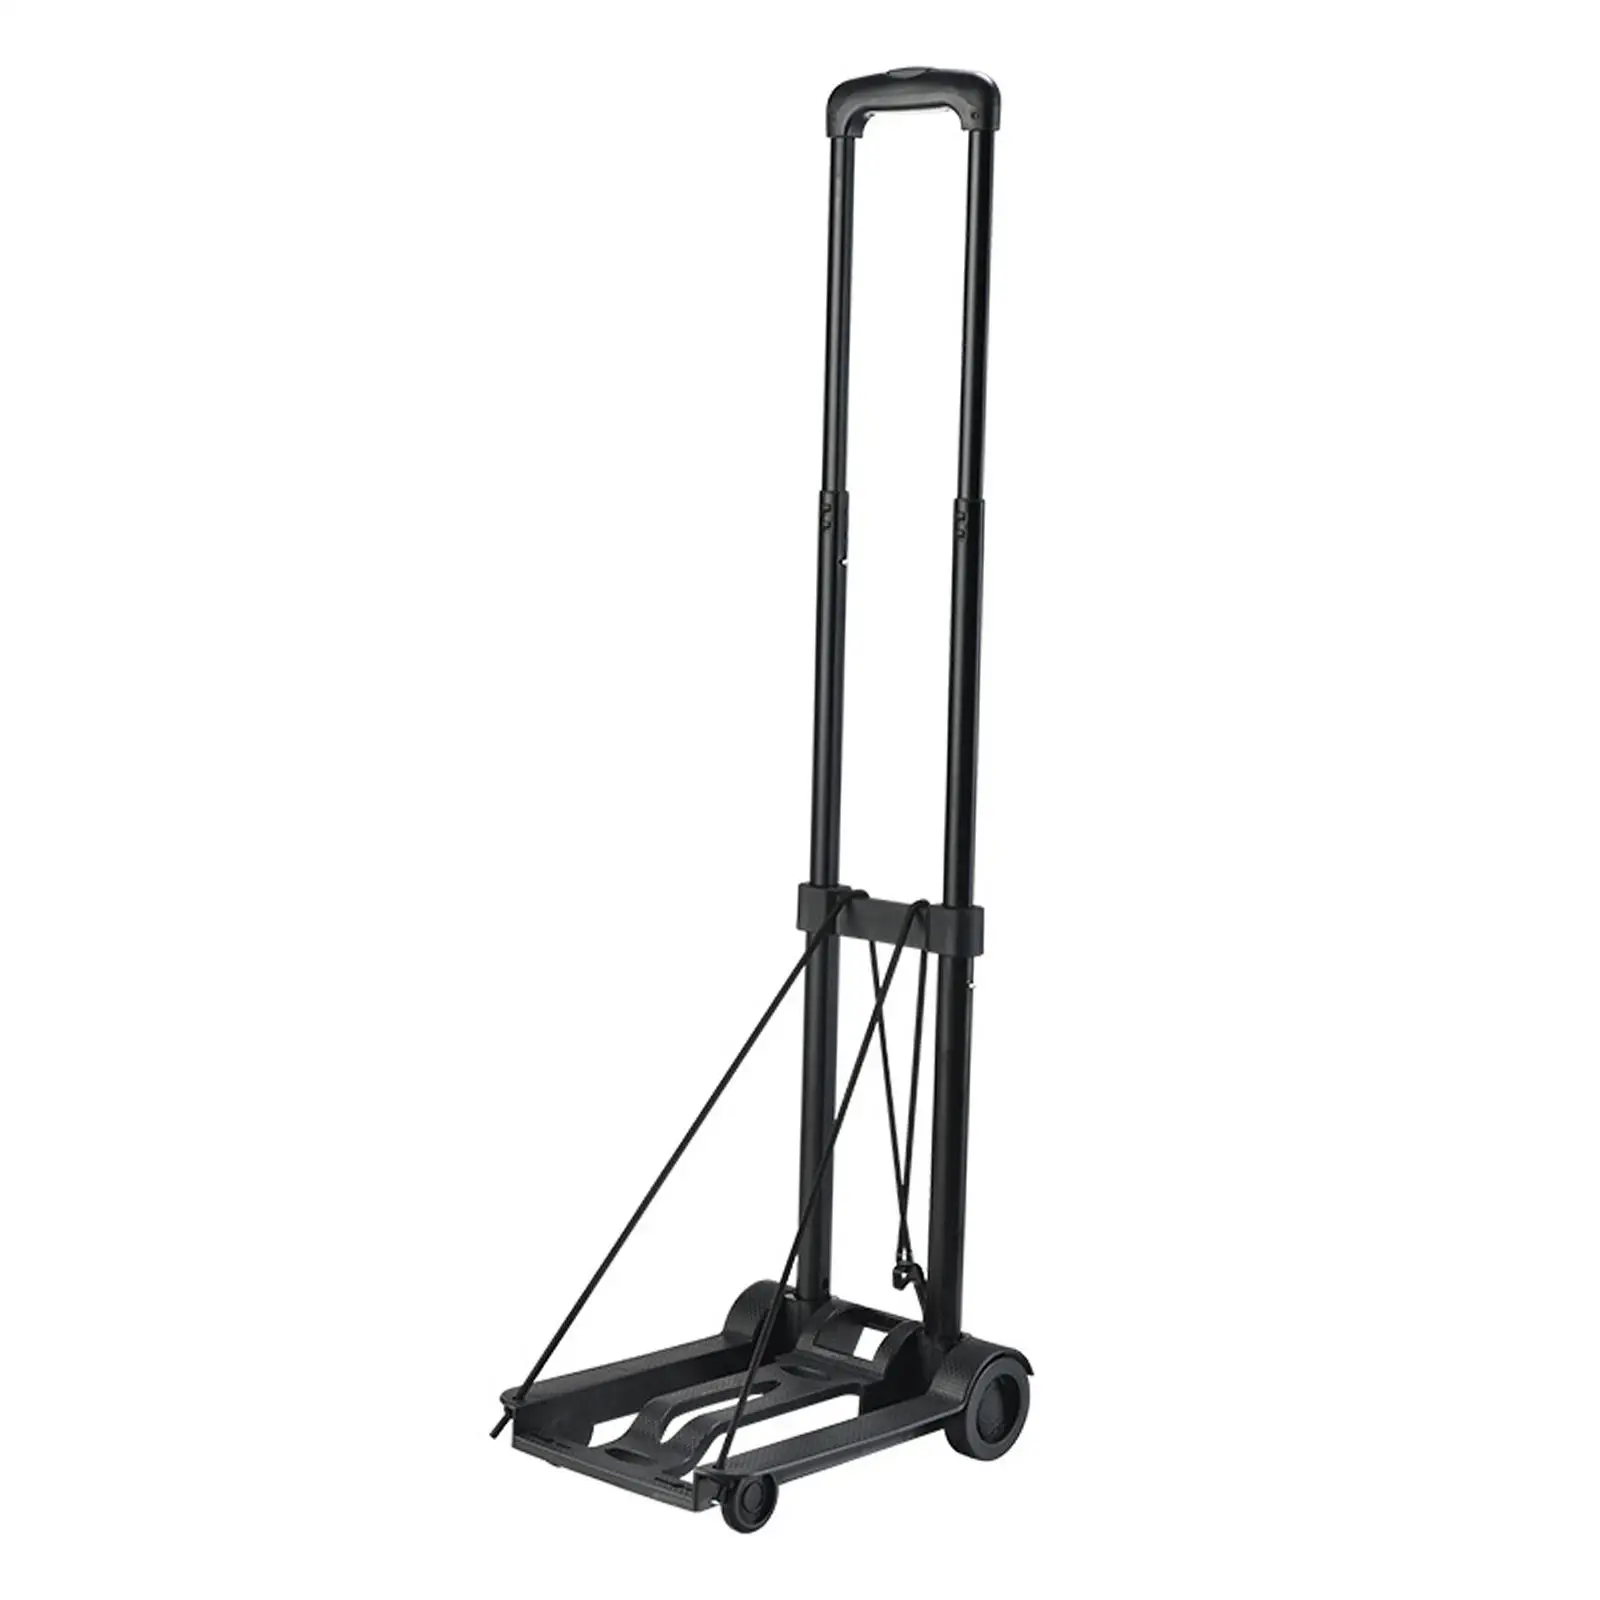 40kg Luggage Trolley Carrier Cart Traveling Multi Purpose Folding Hand Truck